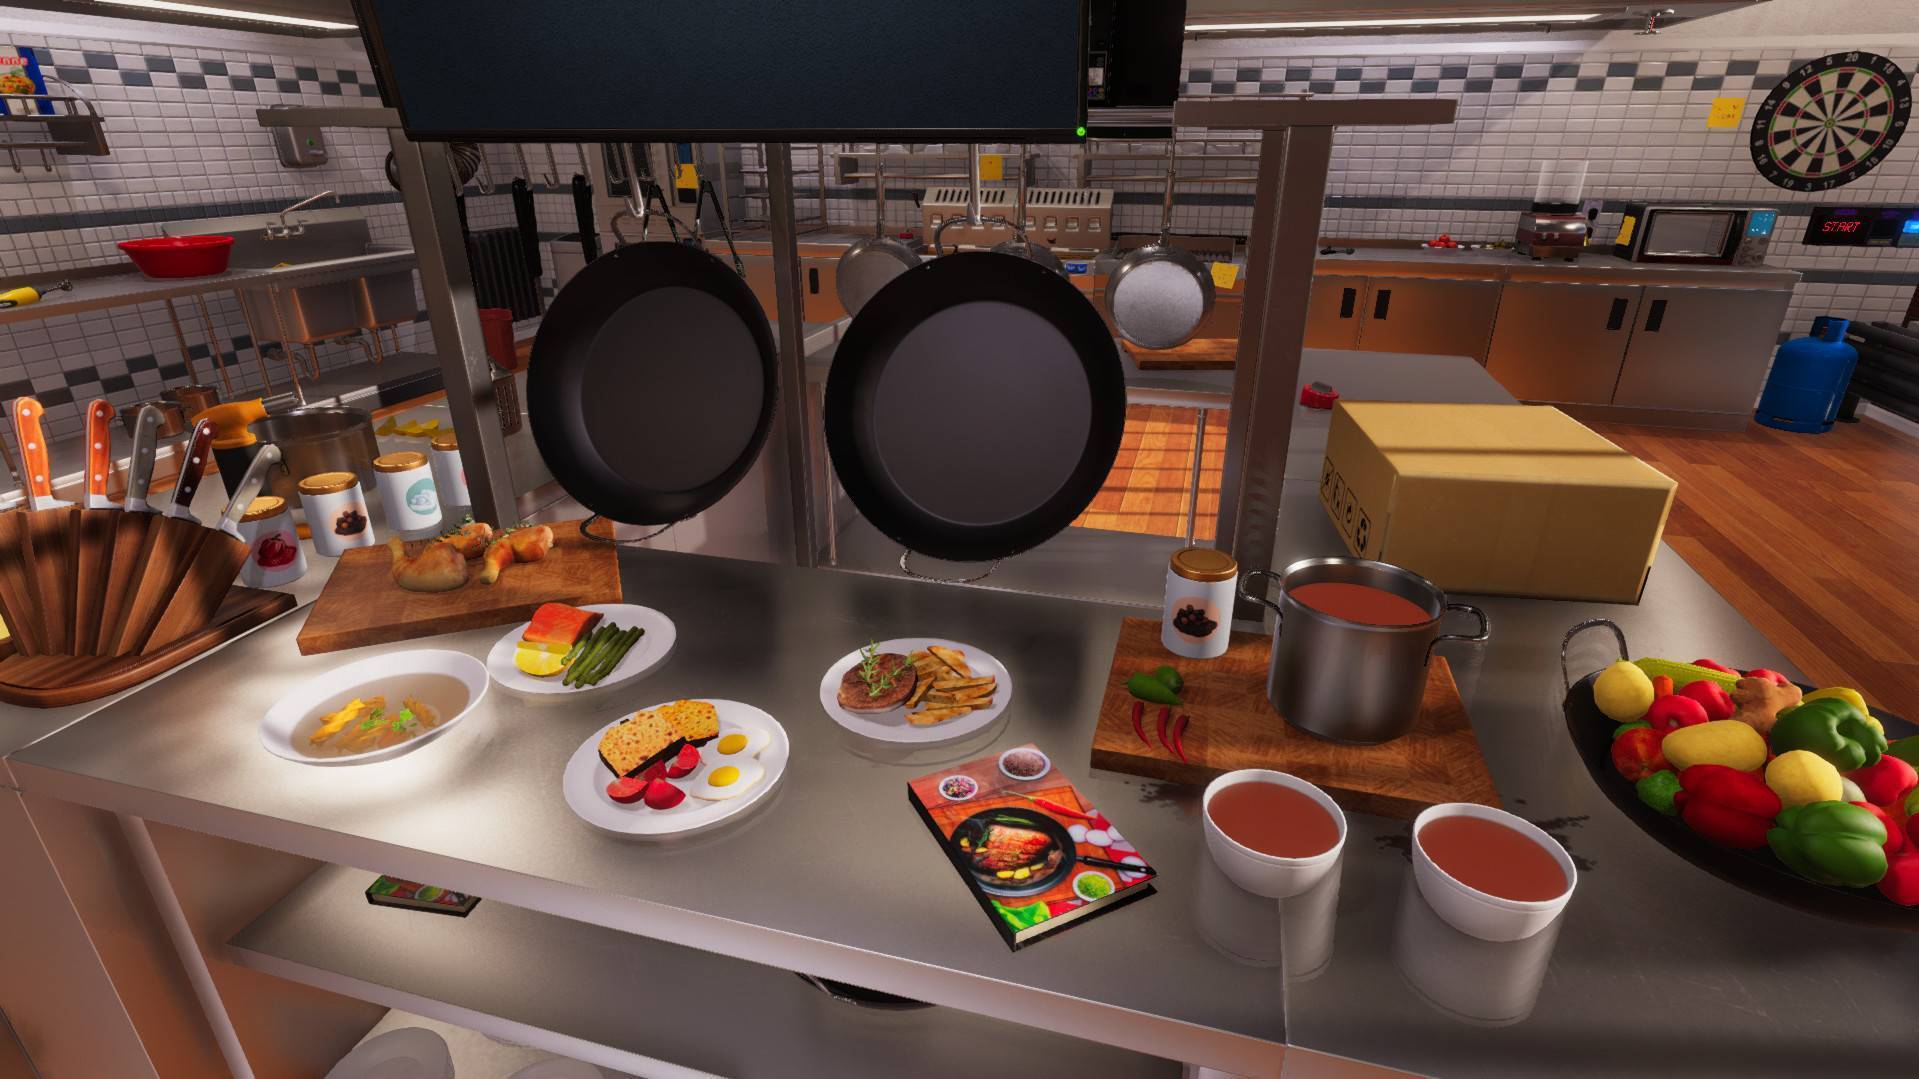 Cheapest Cooking Simulator VR Key for PC